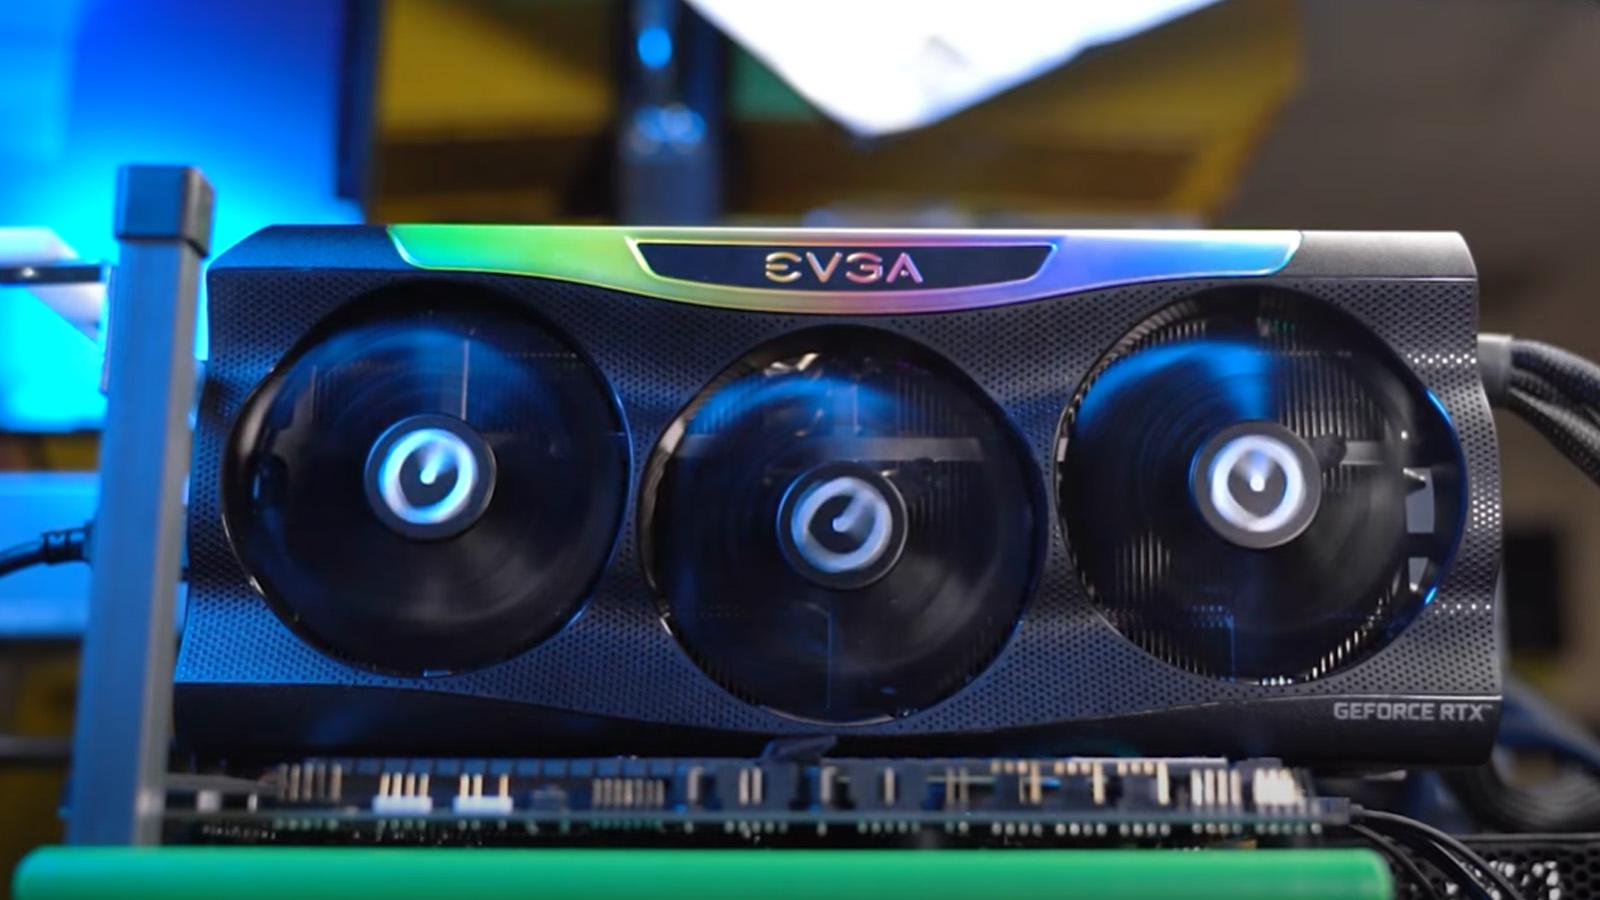 EVGA Ends Partnership with NVIDIA - No more NVIDIA Graphics cards (updated)